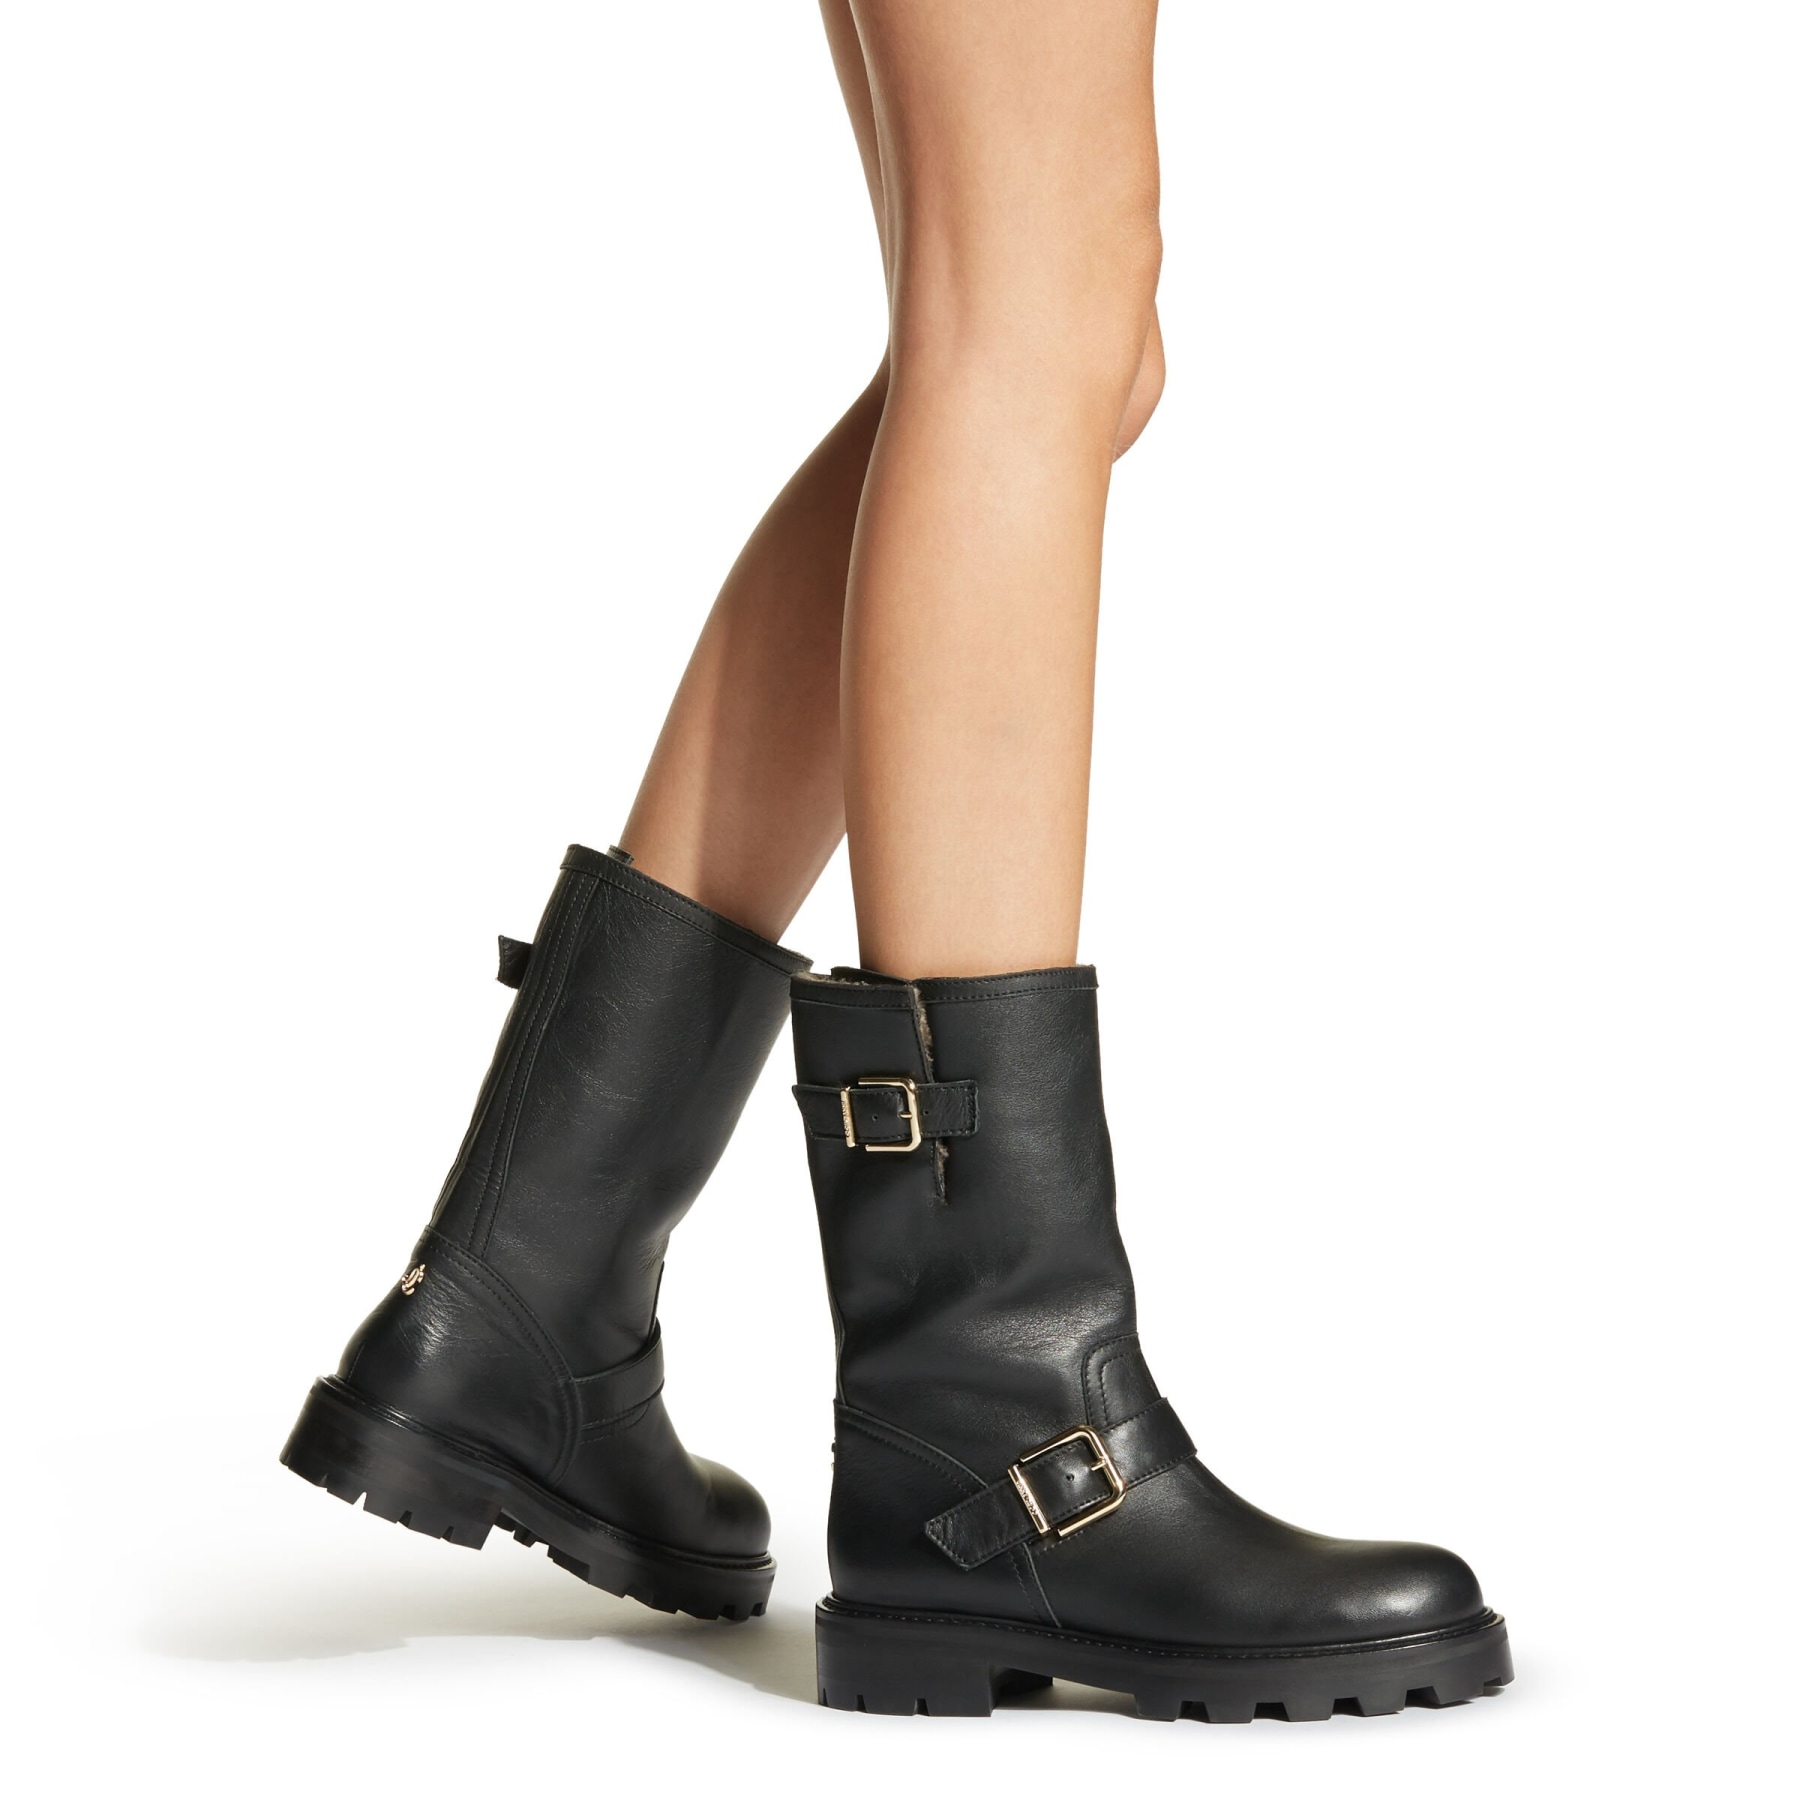 Black Smooth Leather Biker Boots with Shearling Lining|BIKER II 